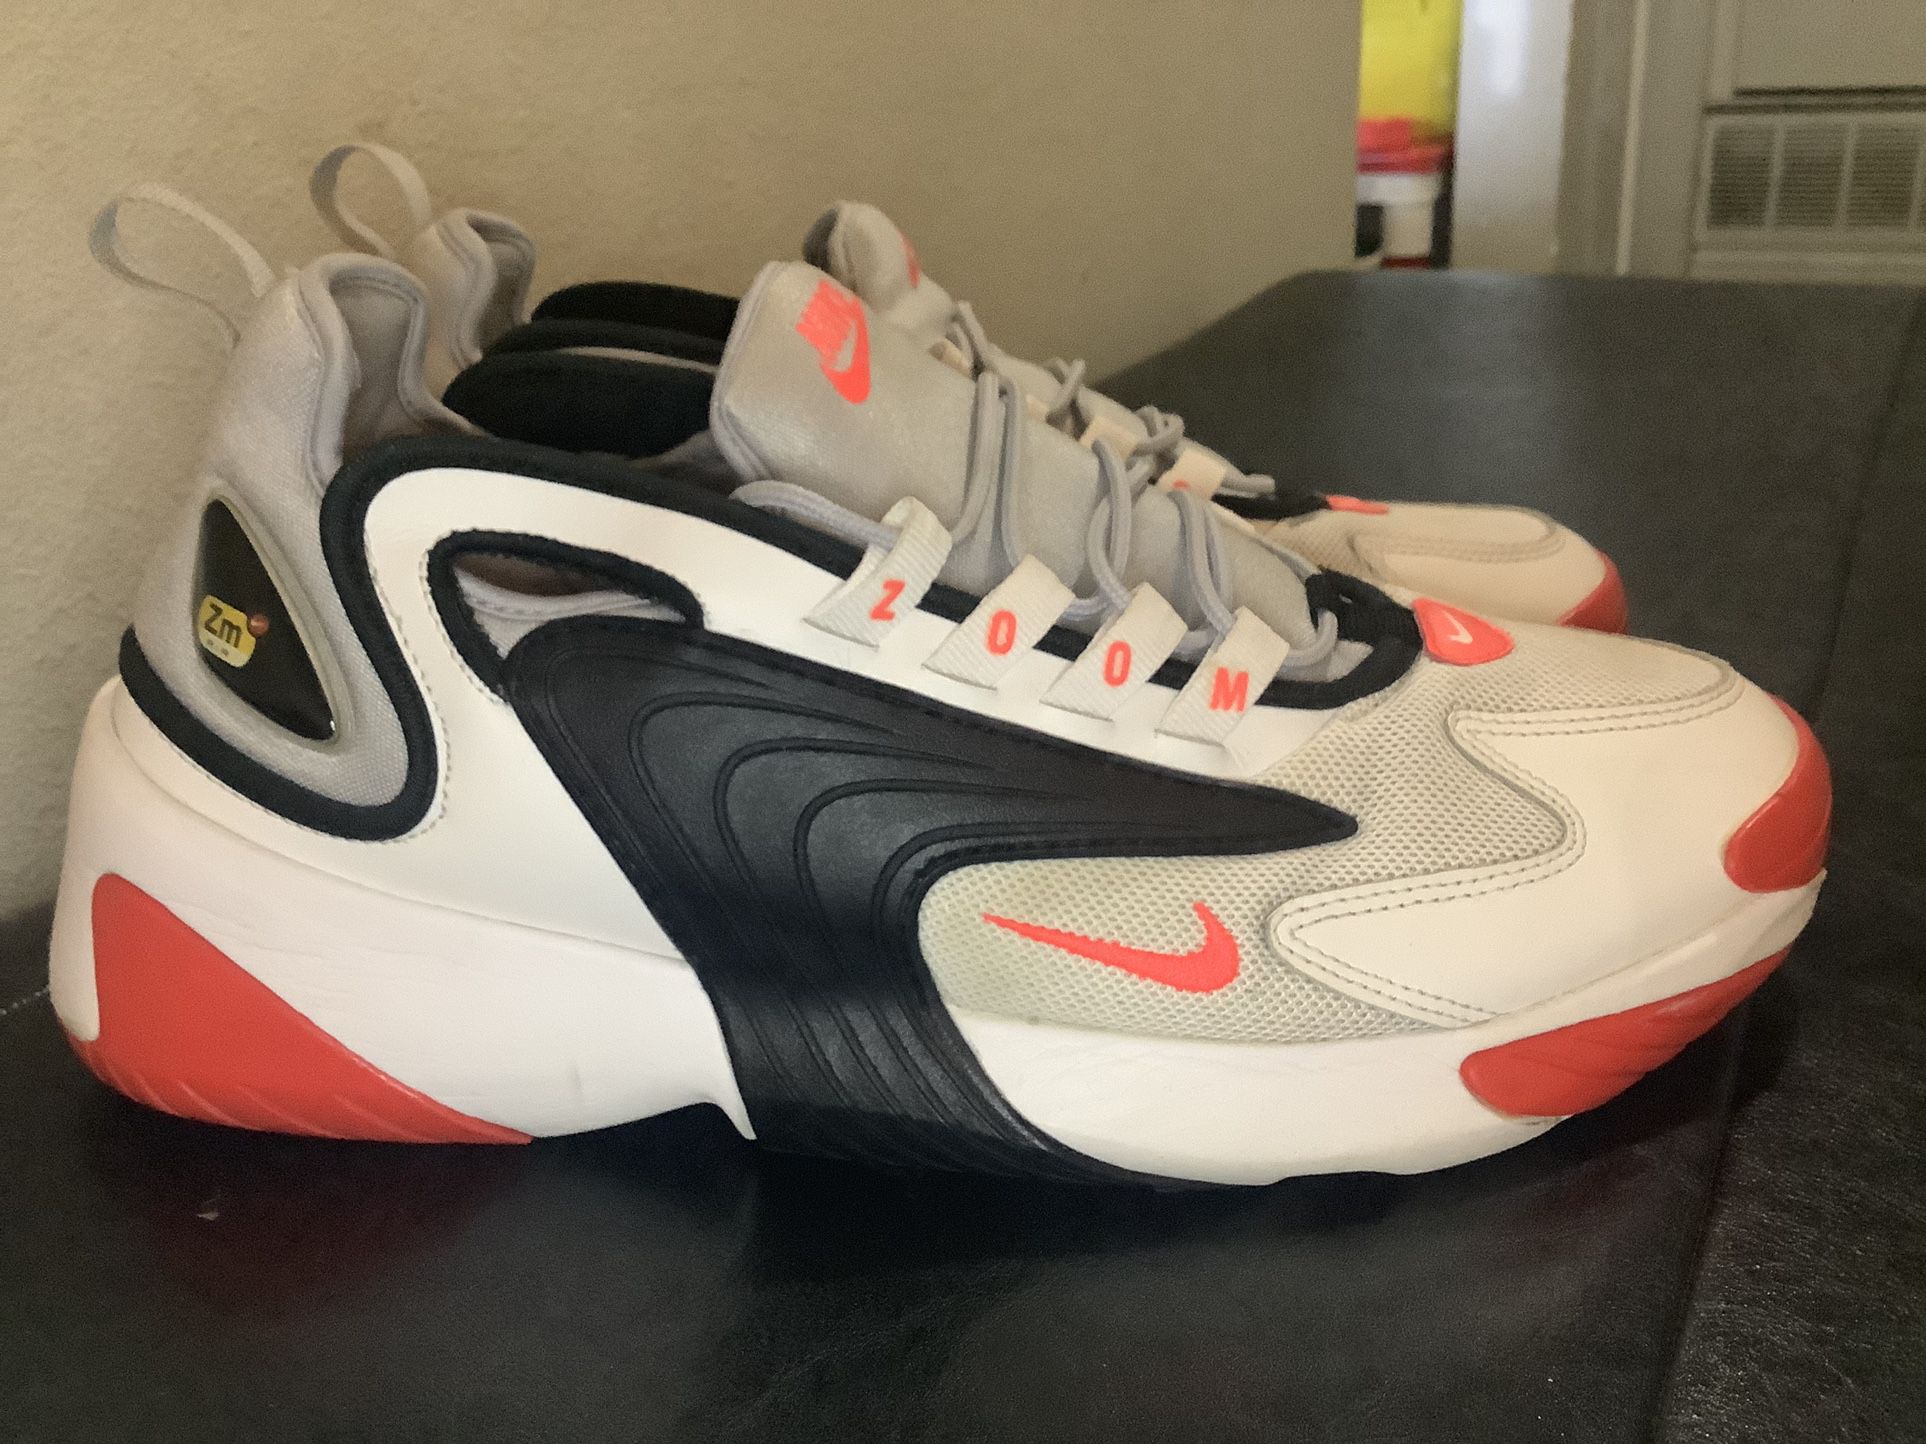 Nike Zoom Grey Infrared for Sale in TX - OfferUp